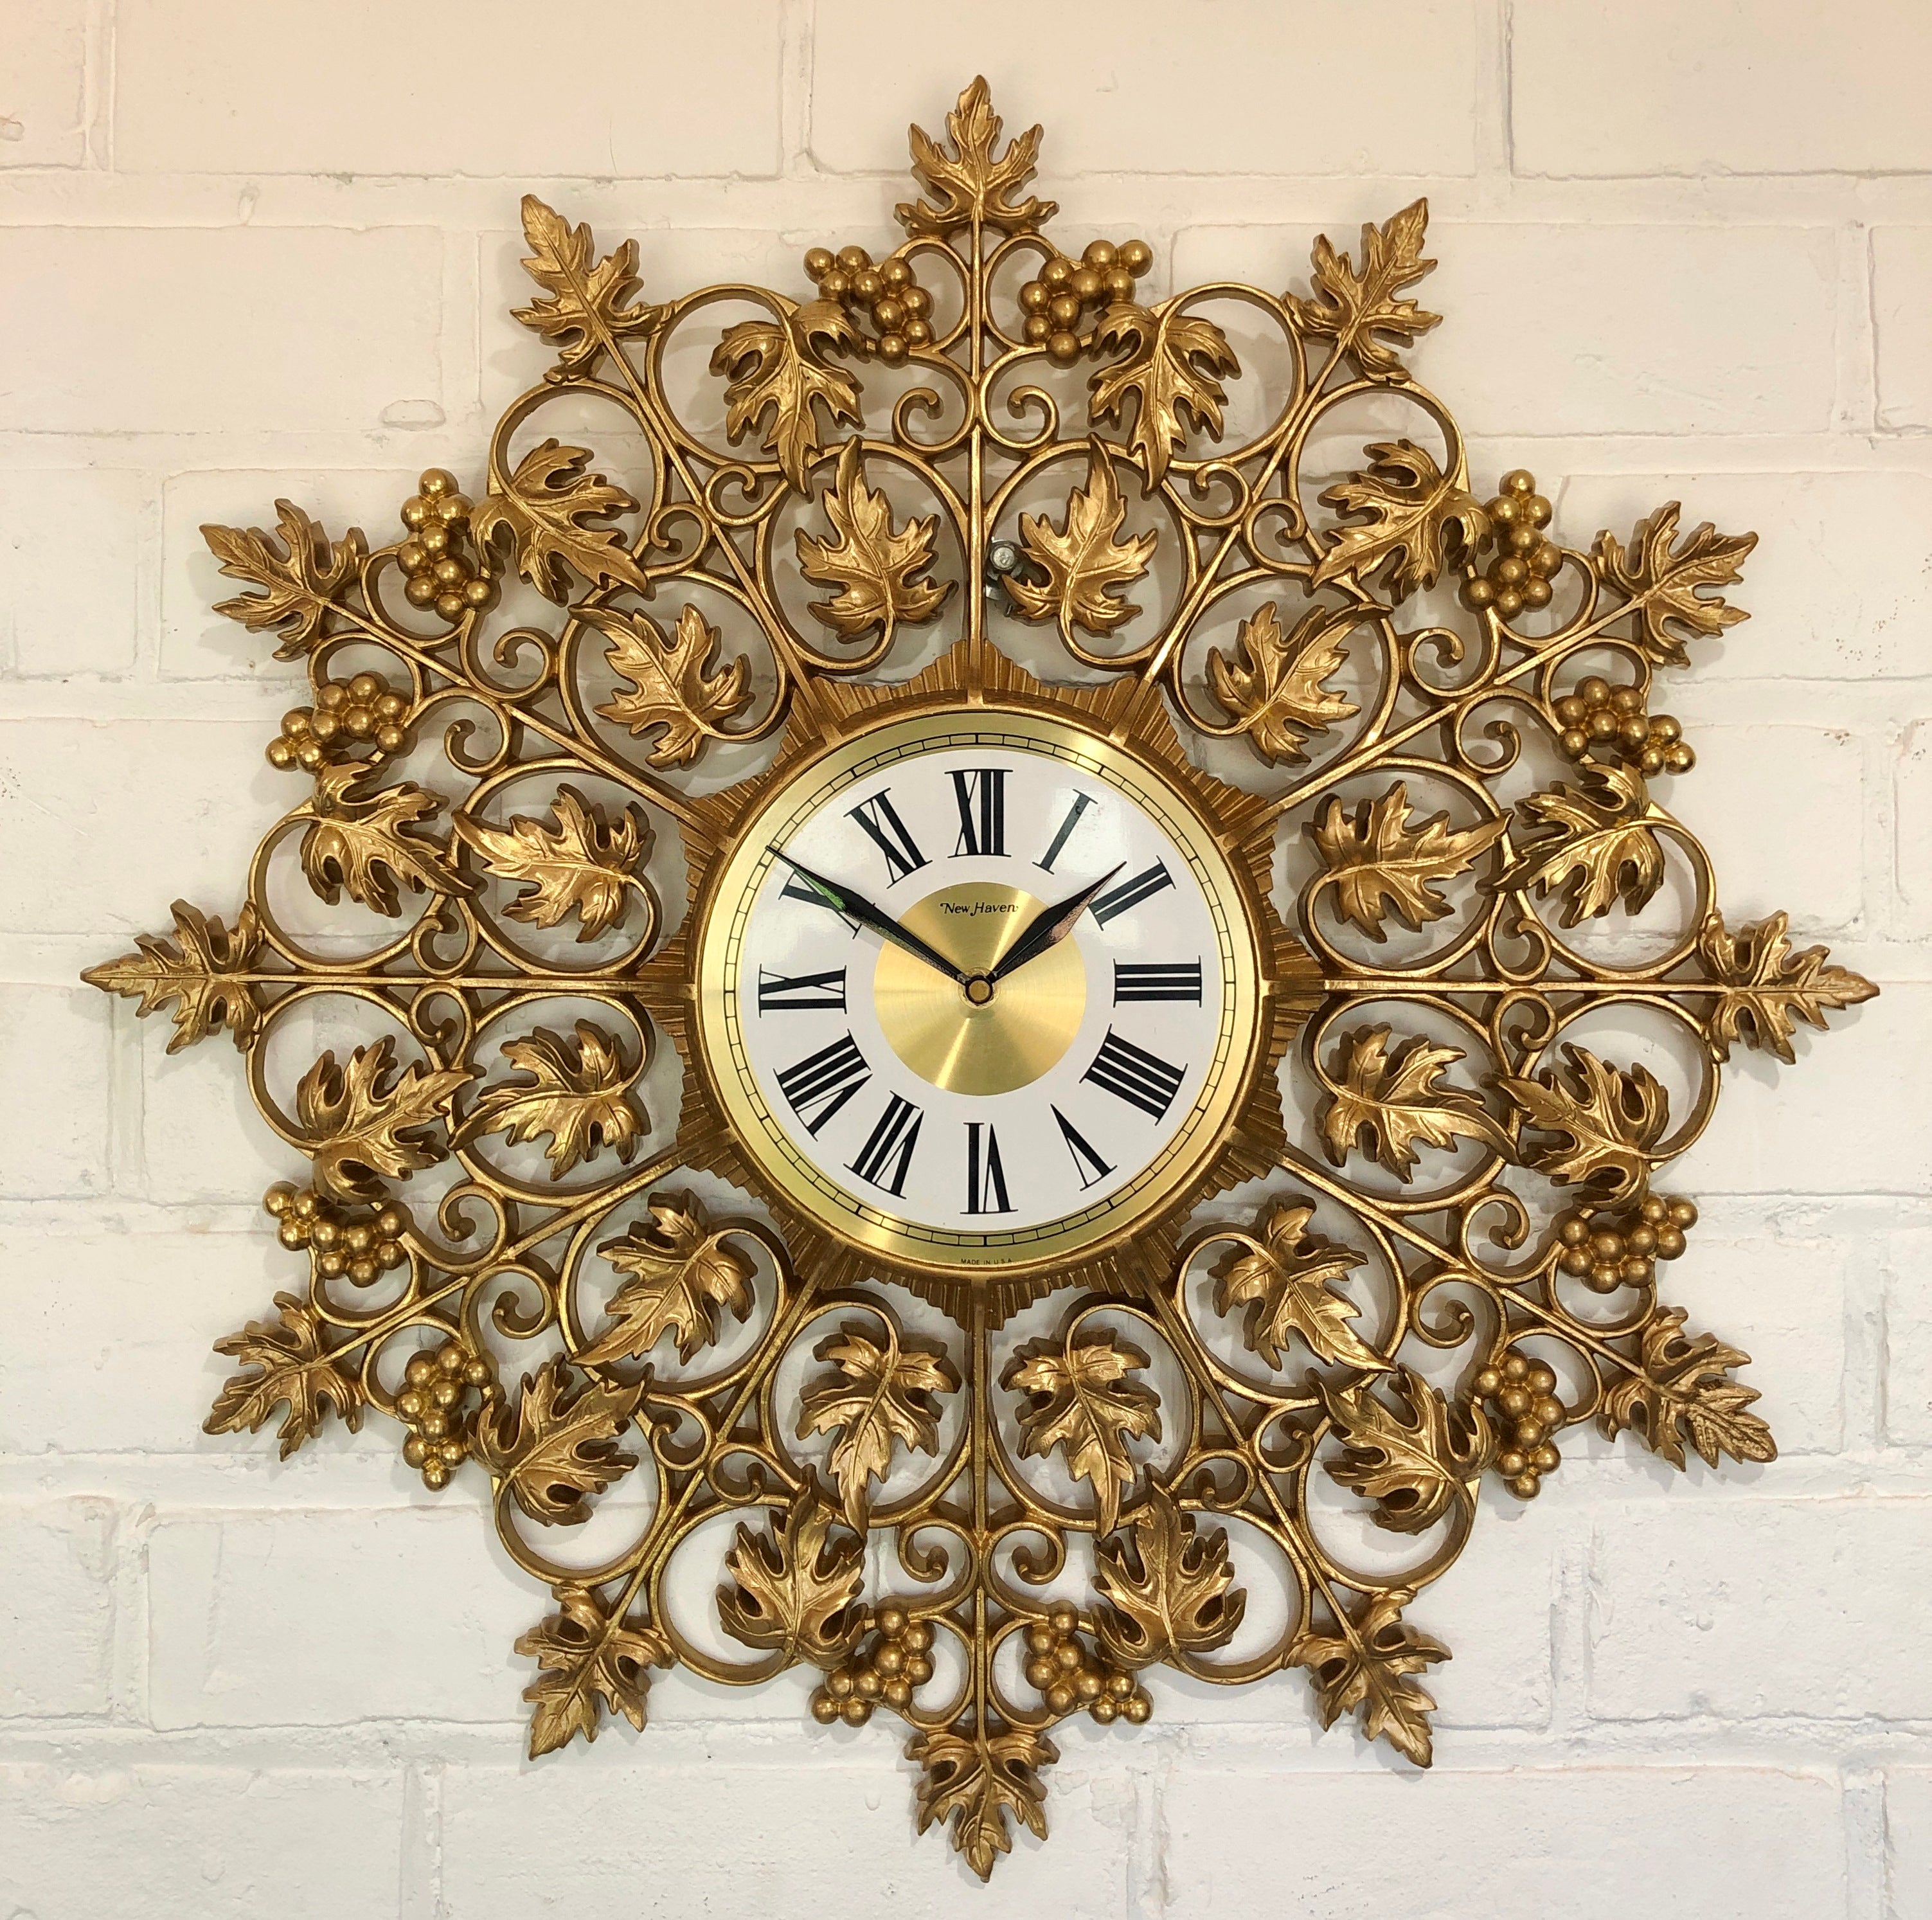 Vintage NEW HAVEN Starburst Ornate Wall Clock | eXibit collection